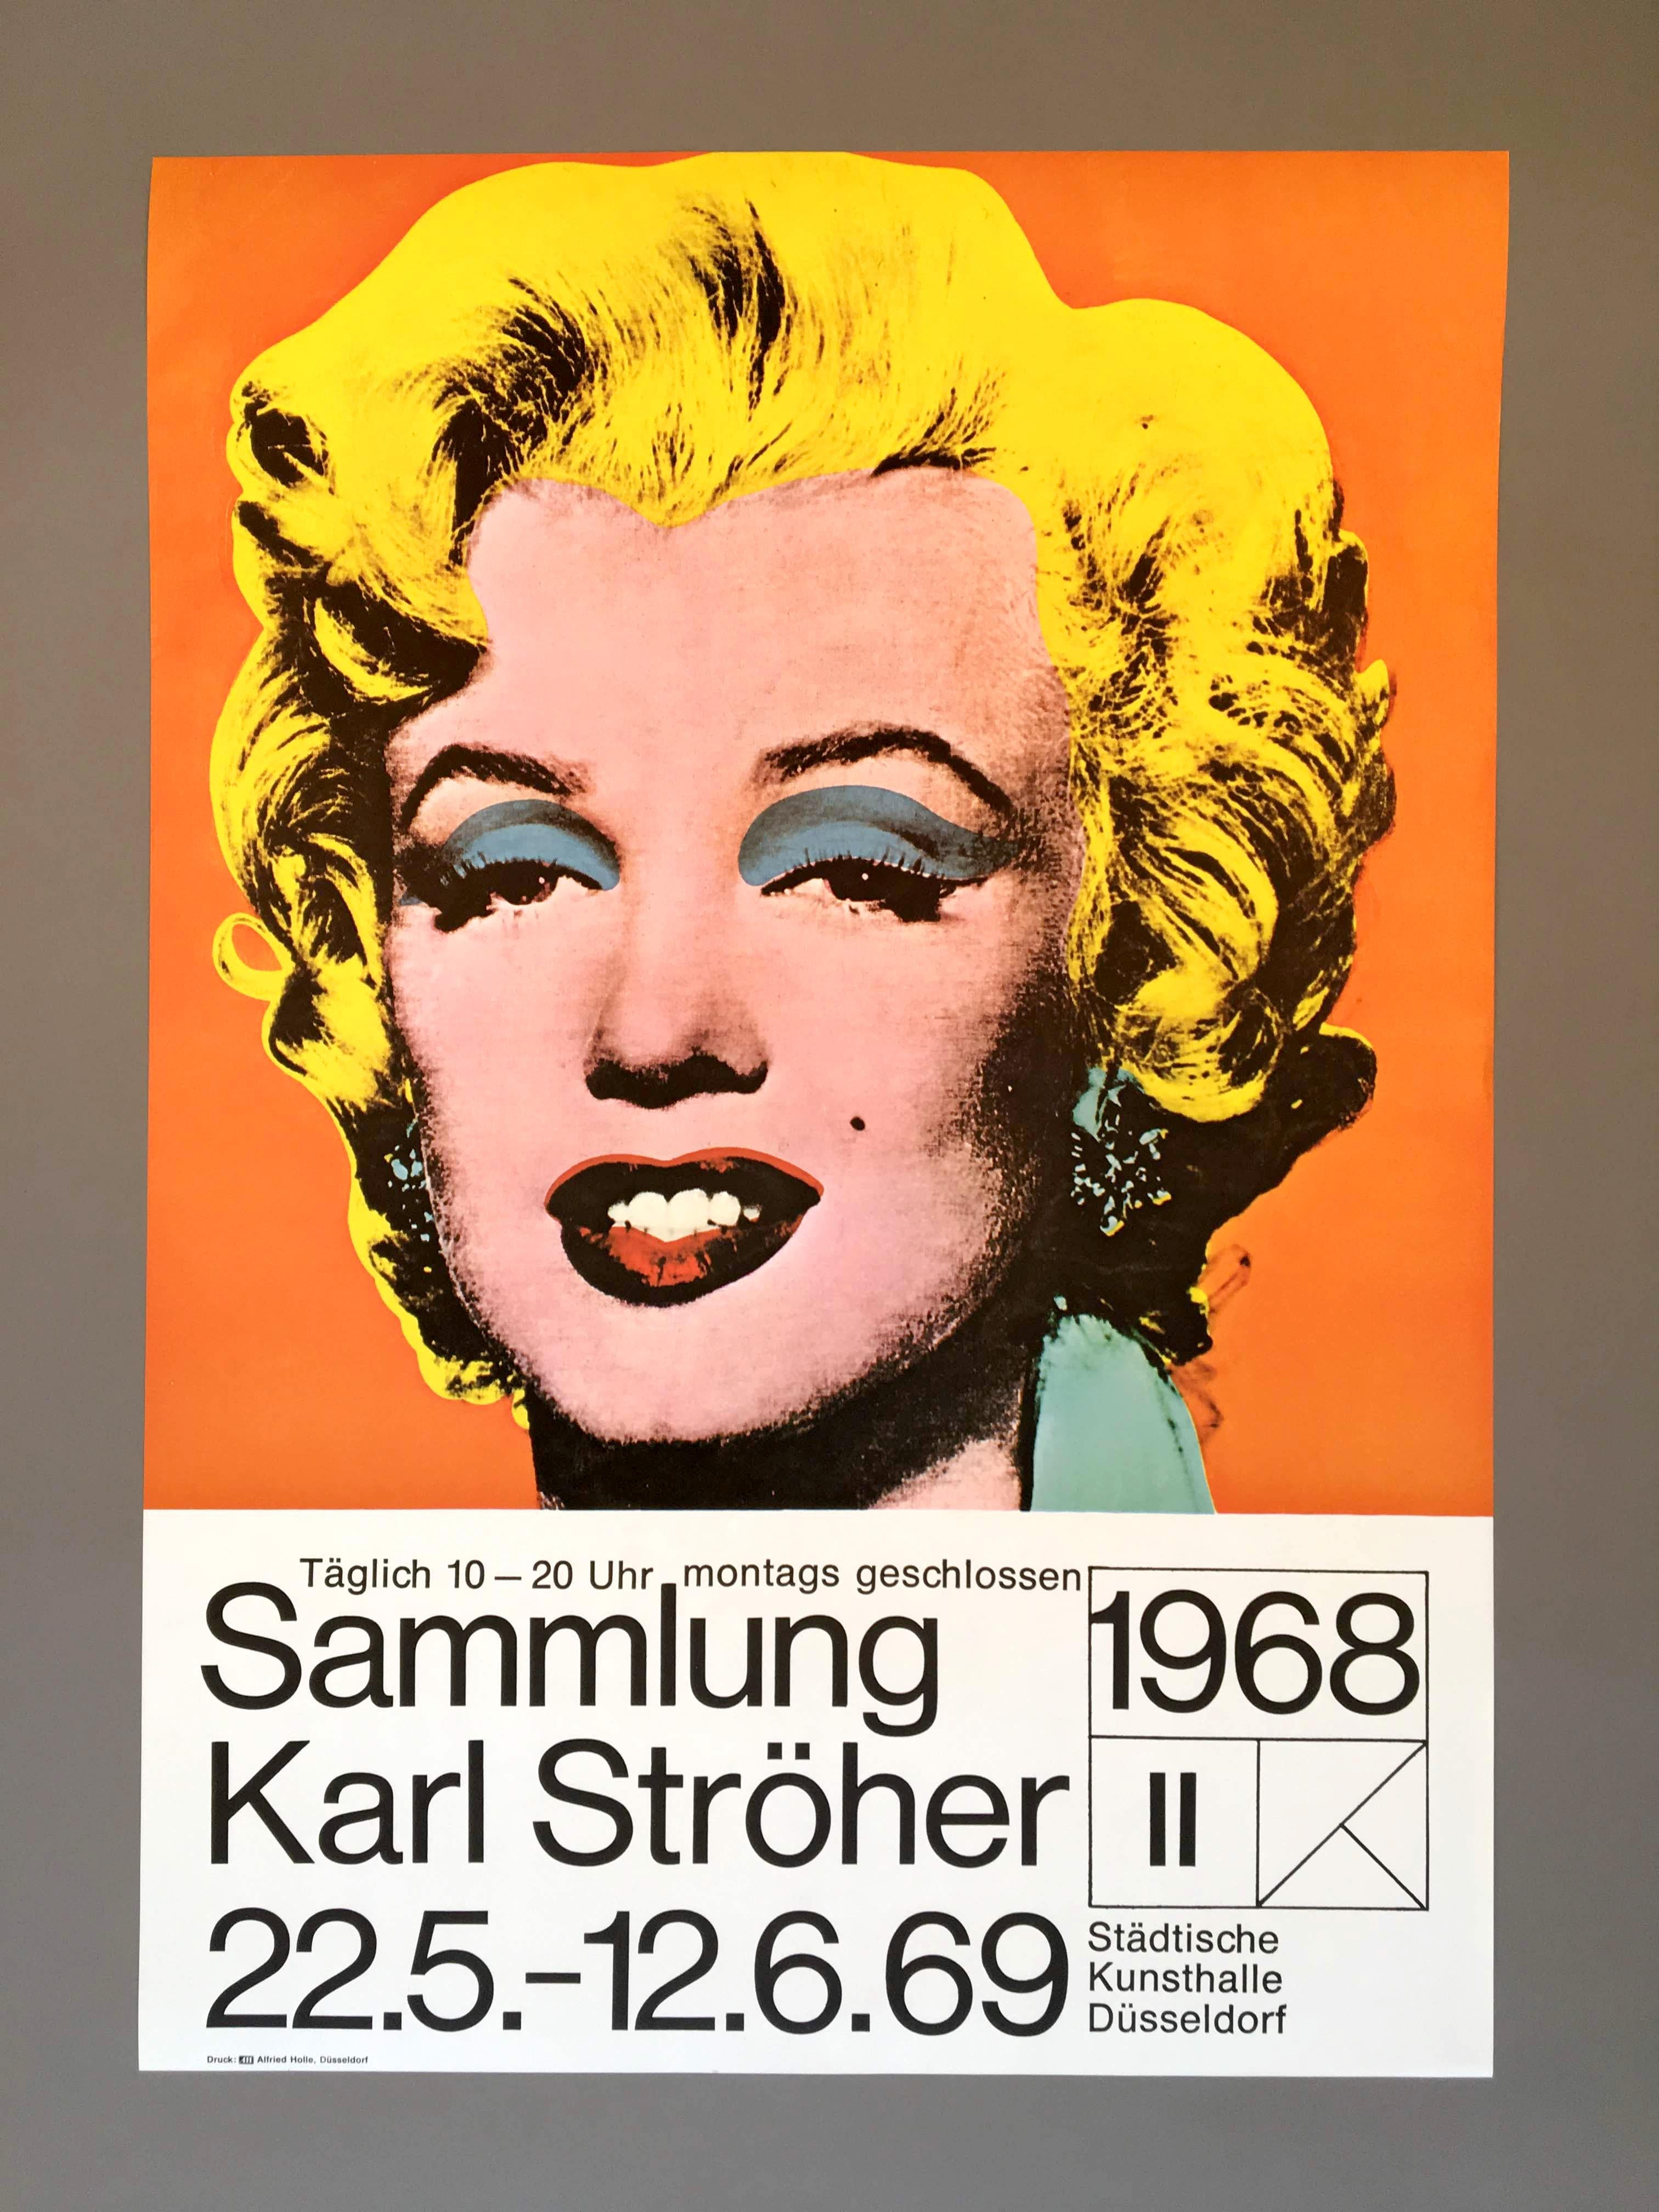 Andy Warhol (United States, 1928-1987)
'Marilyn', 1968
 
With its iconic Bauhaus-style graphics complimenting the iconic image of Marilyn Monroe, this print was made just one year after Warhol's first exhibition at Tate Modern, London unveiling the